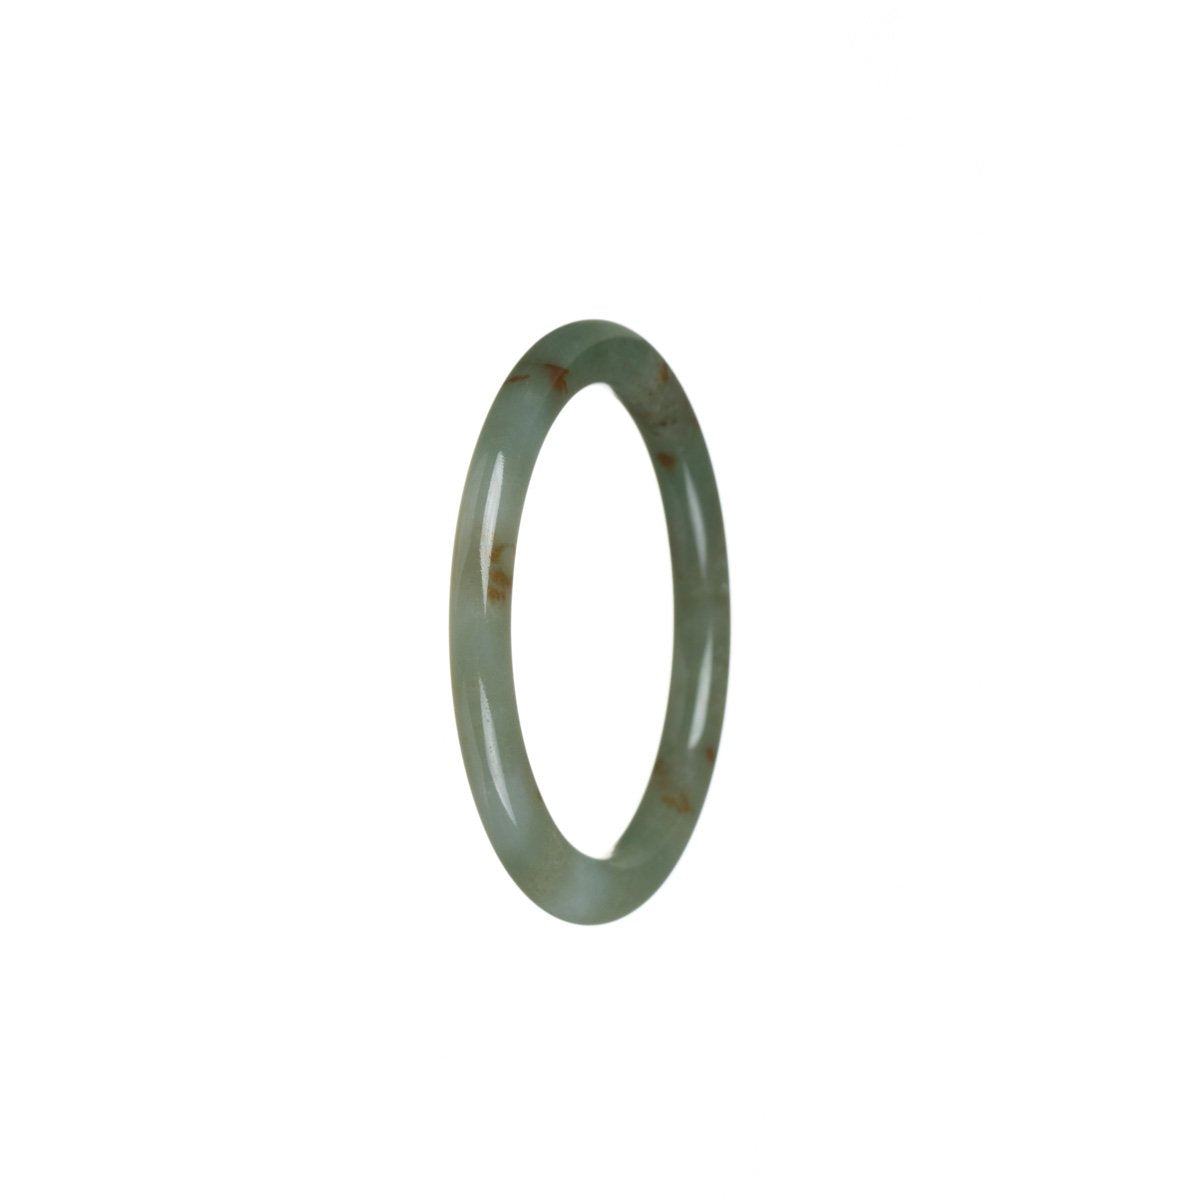 A close-up image of a small, vibrant green Burmese jade bangle bracelet designed for children. The bracelet features a smooth, polished surface, showcasing the natural beauty of the genuine Type A jade stone. It is a perfect accessory for young ones, adding a touch of elegance and sophistication to their outfit.